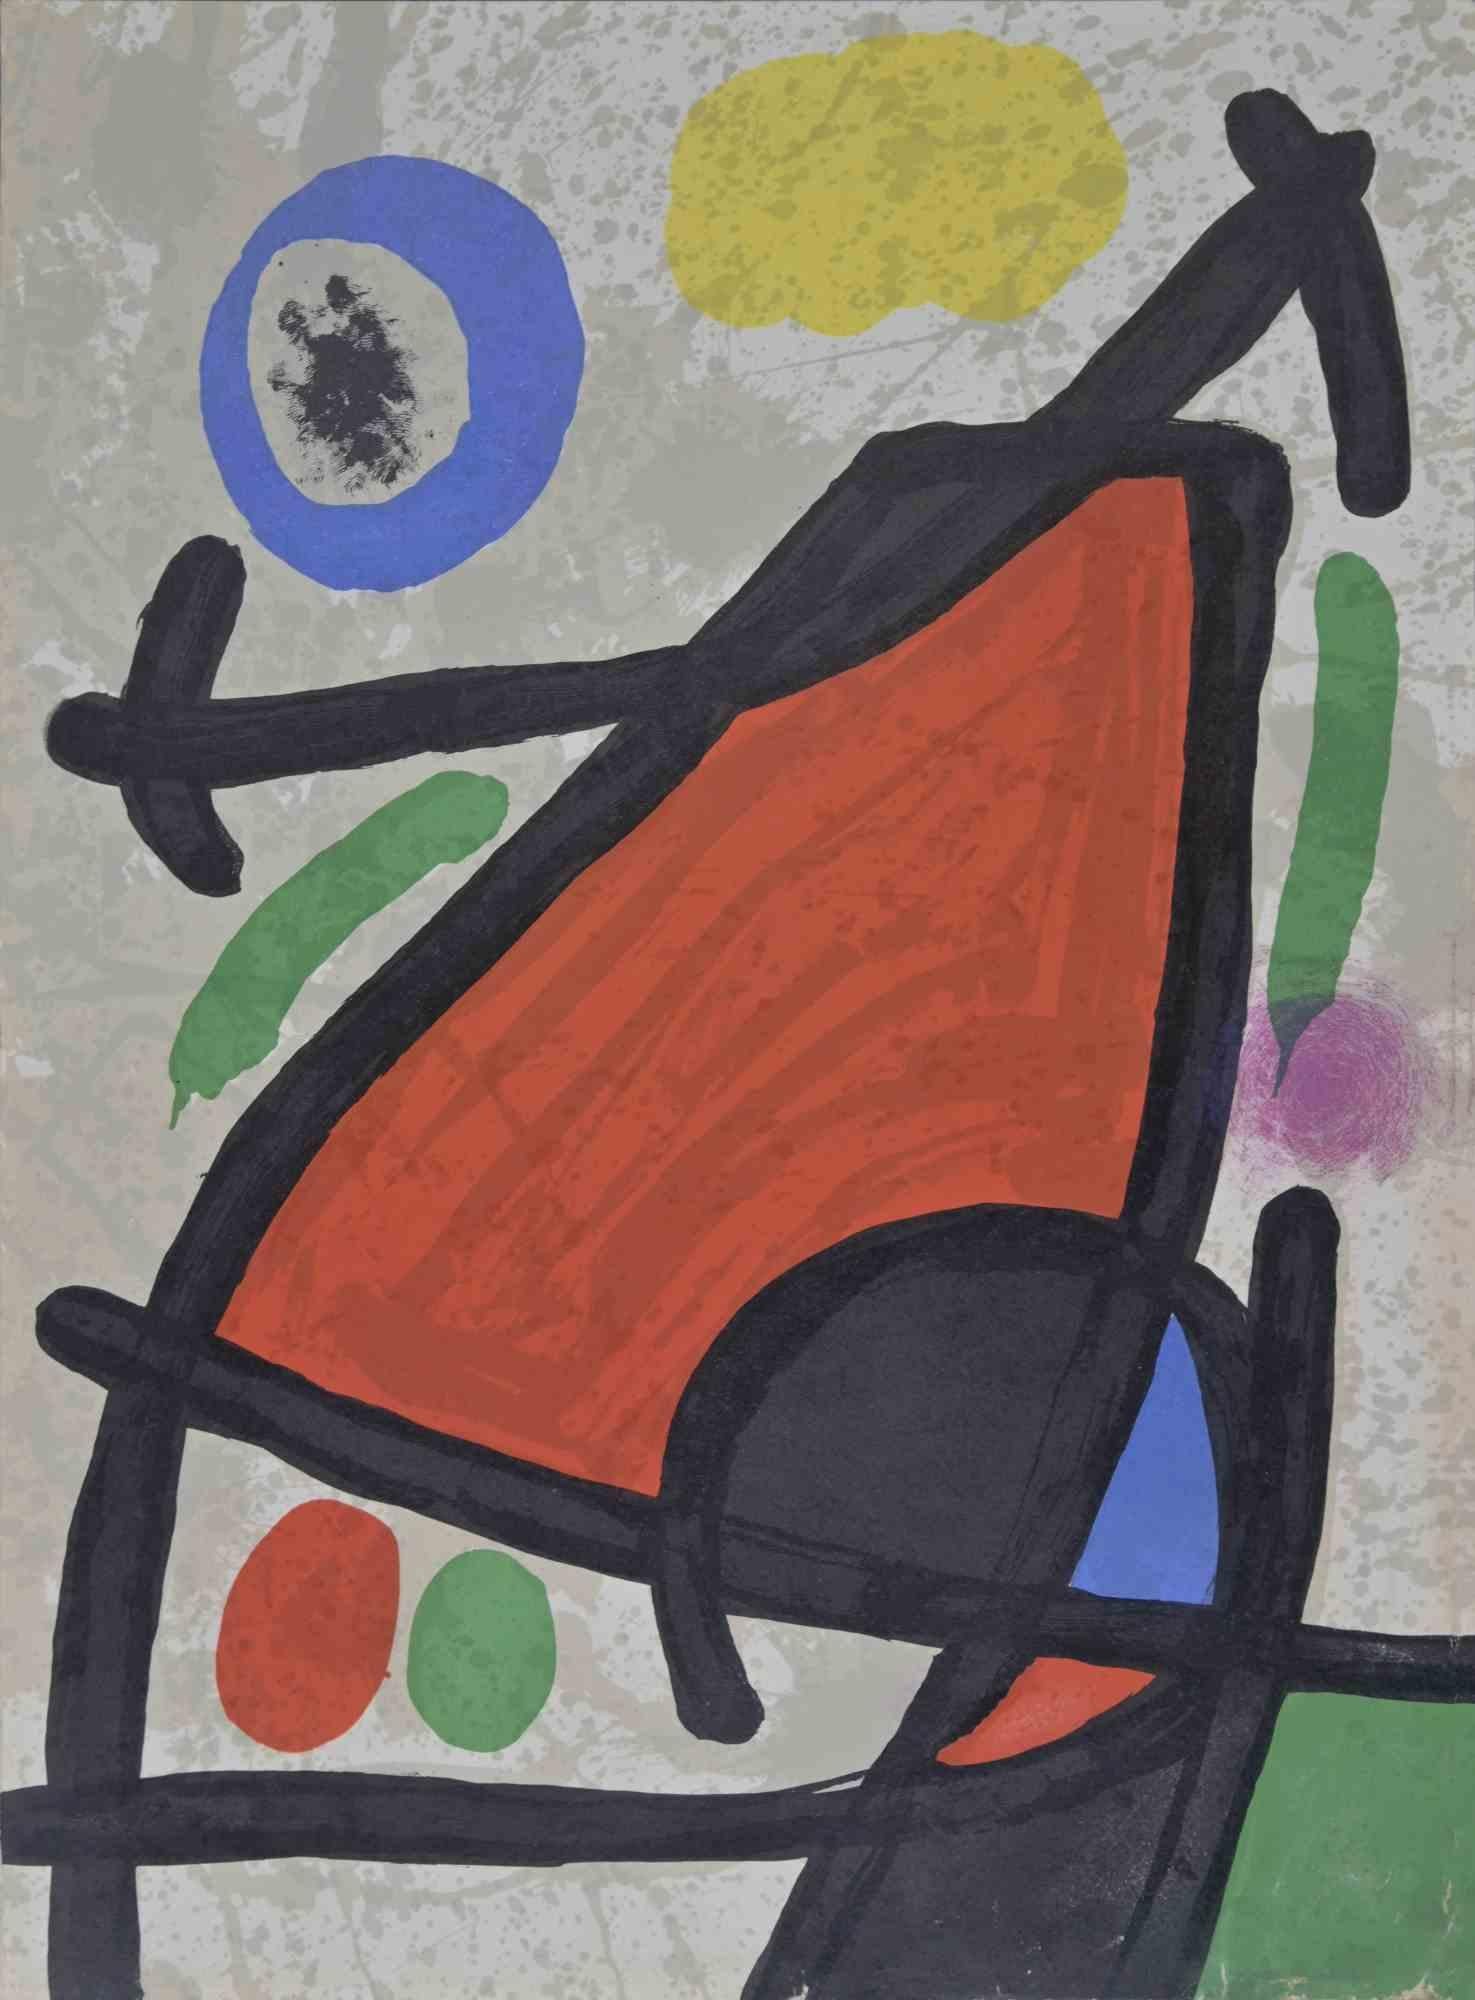 Joan Miró Abstract Print - Composition from" Derrière le Miroir"  - Lithograph by Joan Mirò - 1963